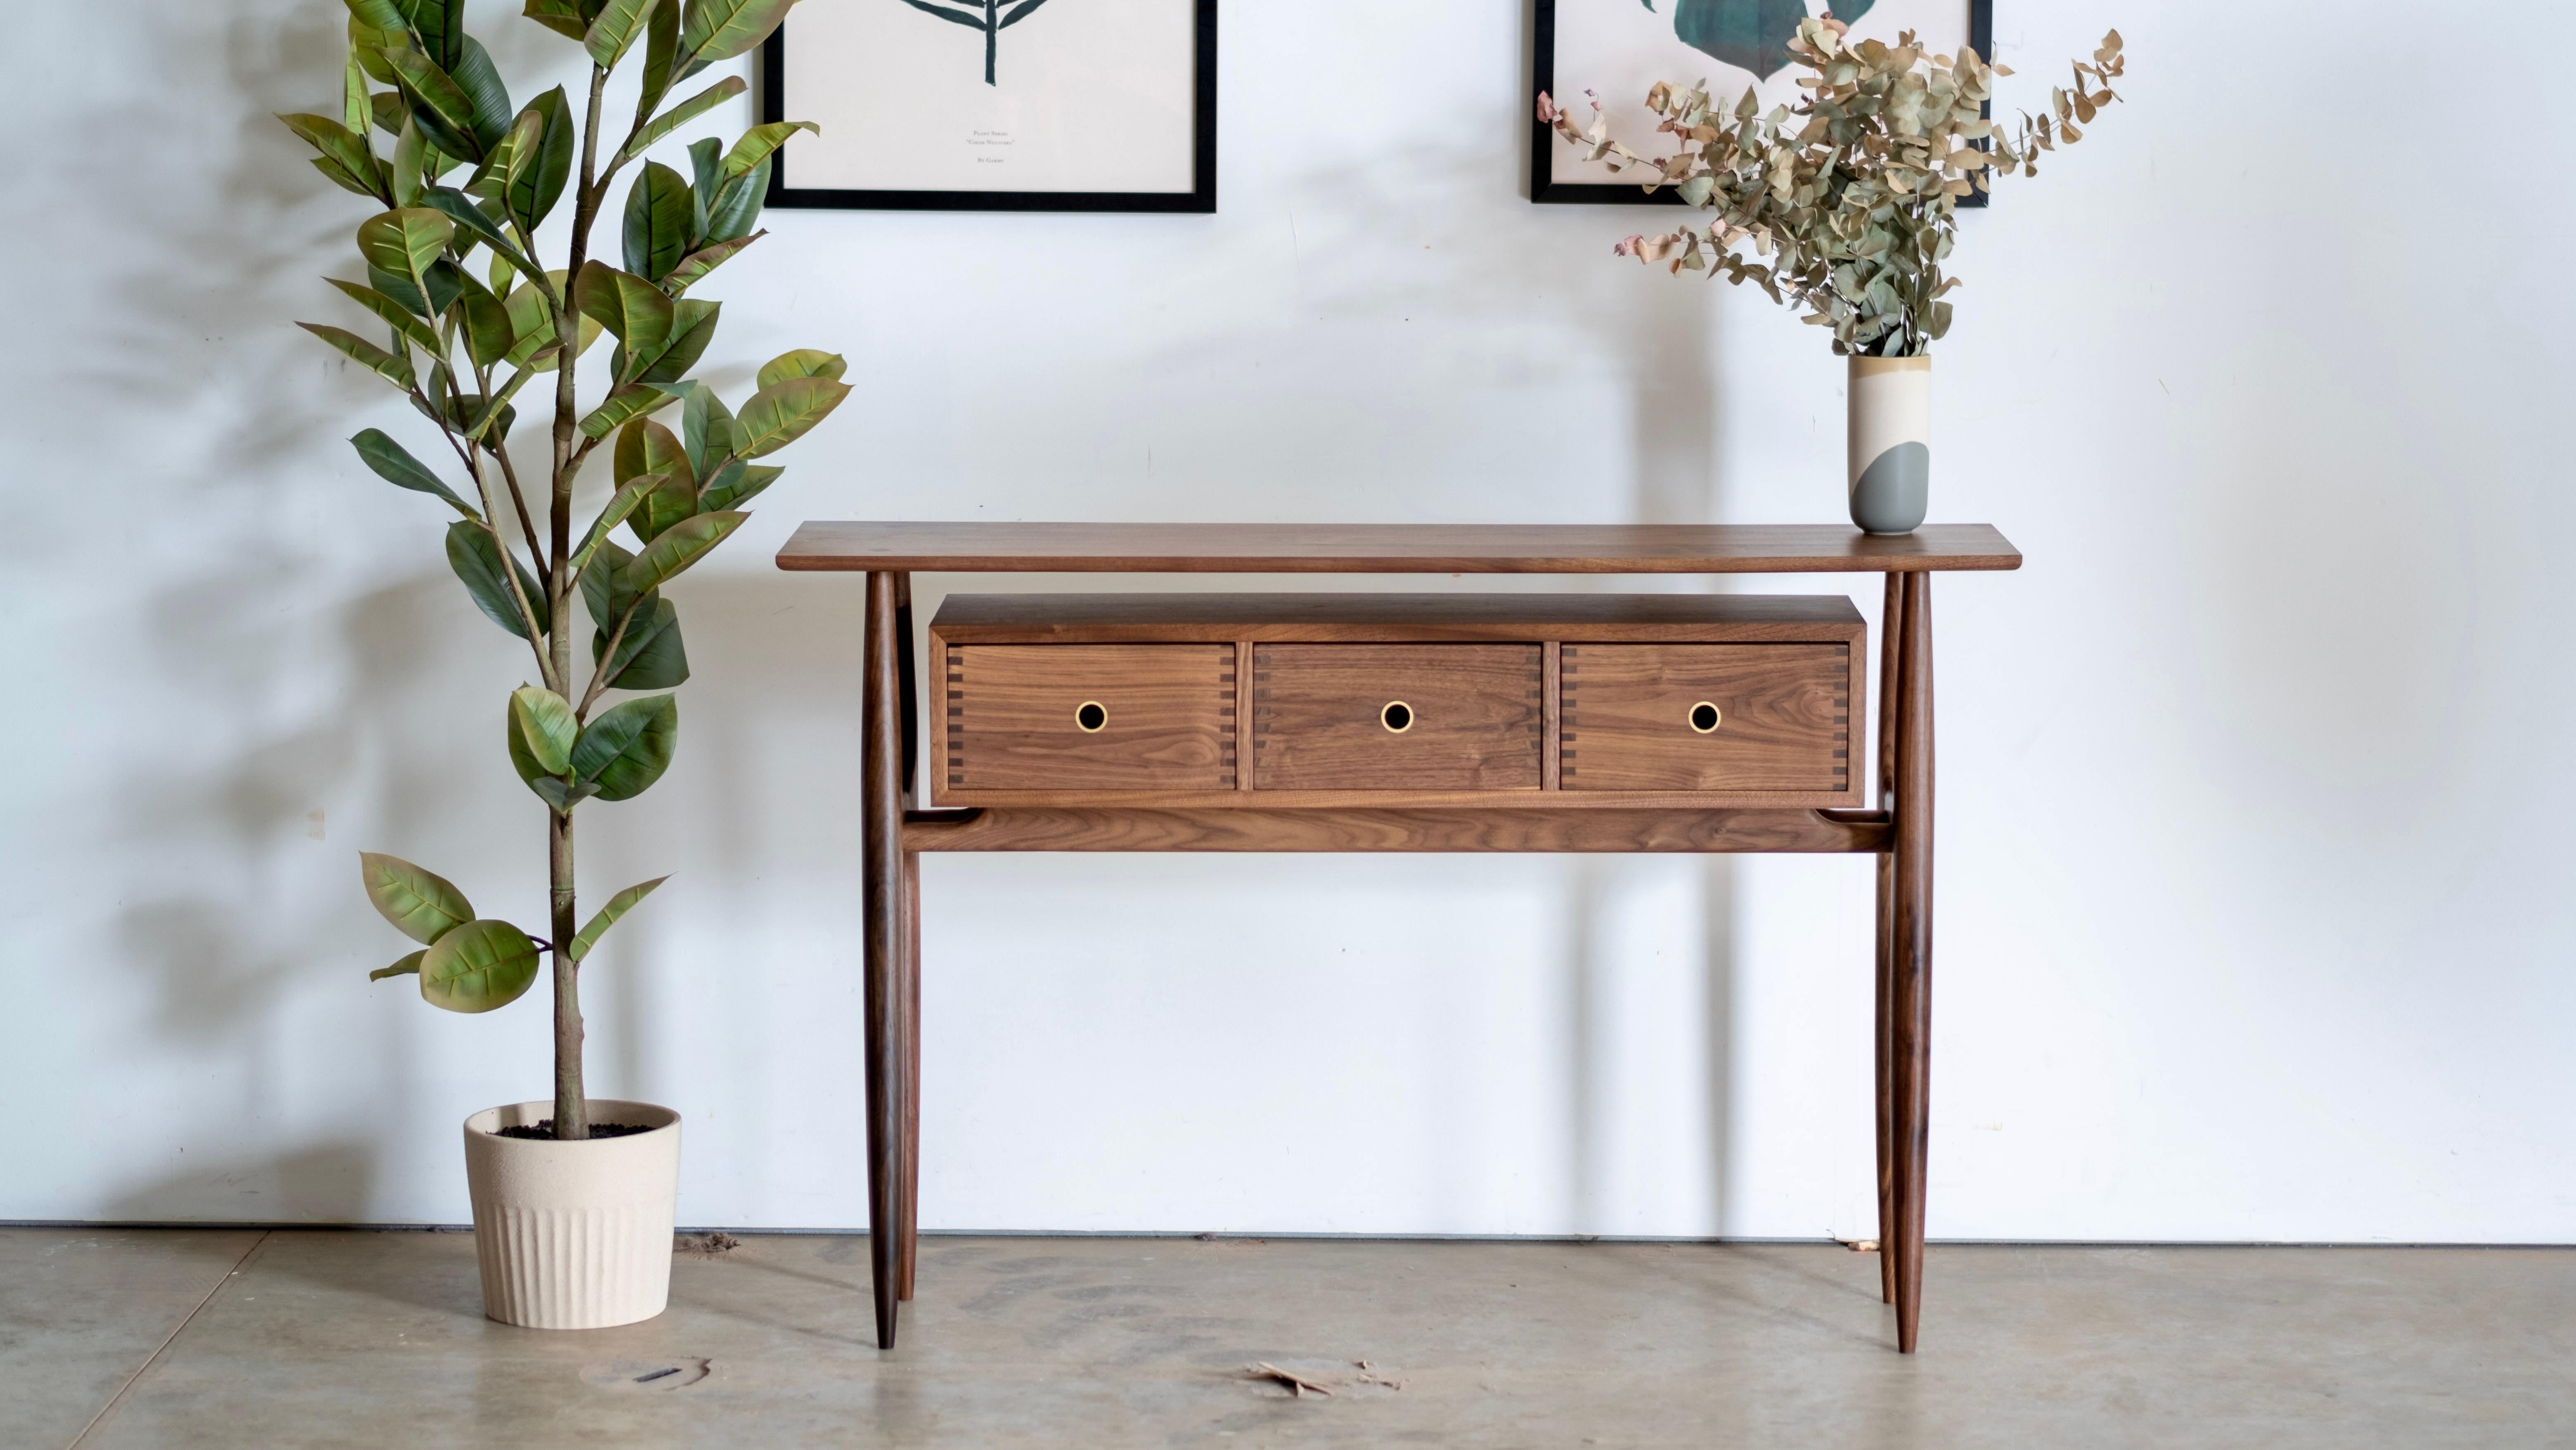 Entry table with subtle soul. This table is built with all hand turned parts and wedged exposed tenons. The floating box features rounded dovetails and the edges are all organically pillow shaped by hand. If you appreciate the function and charm of